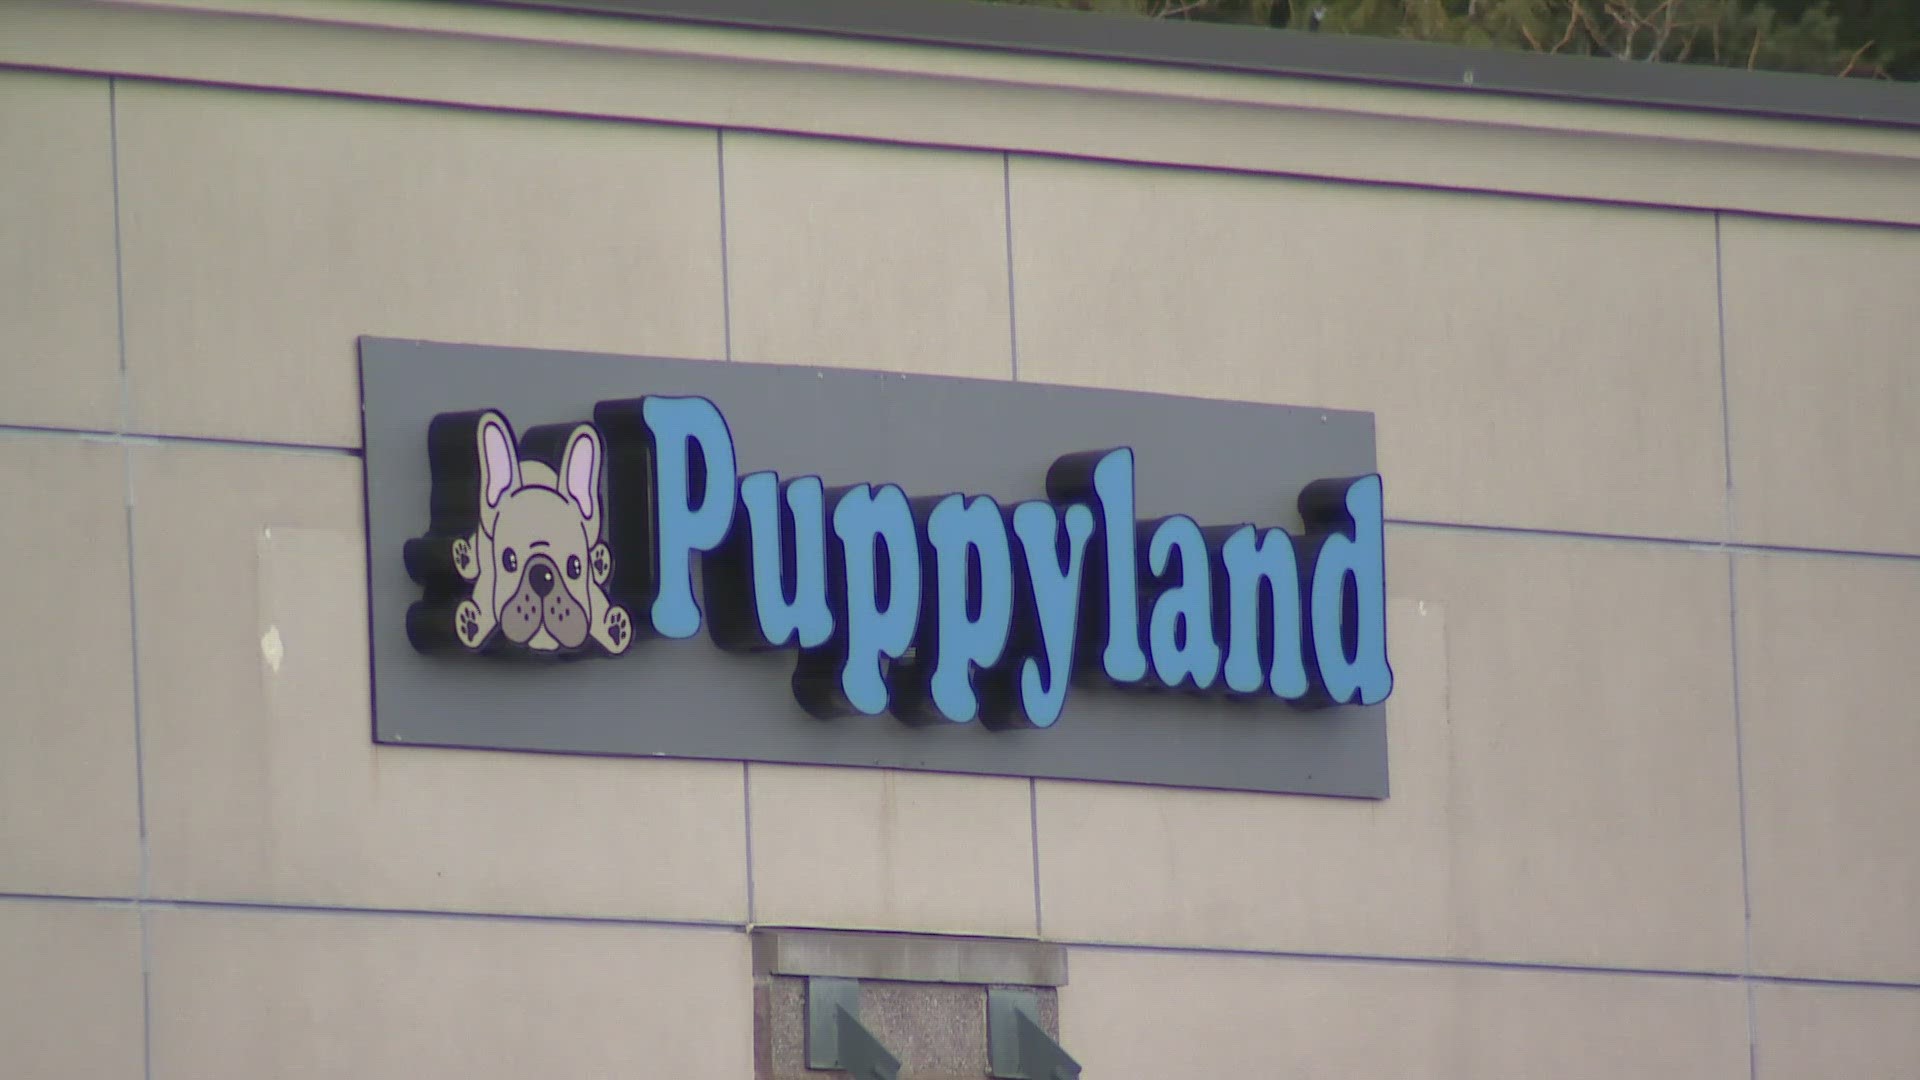 Thieves stole a French bulldog puppy worth $5,400 from the pet store in March. Two months later the store was targeted again.